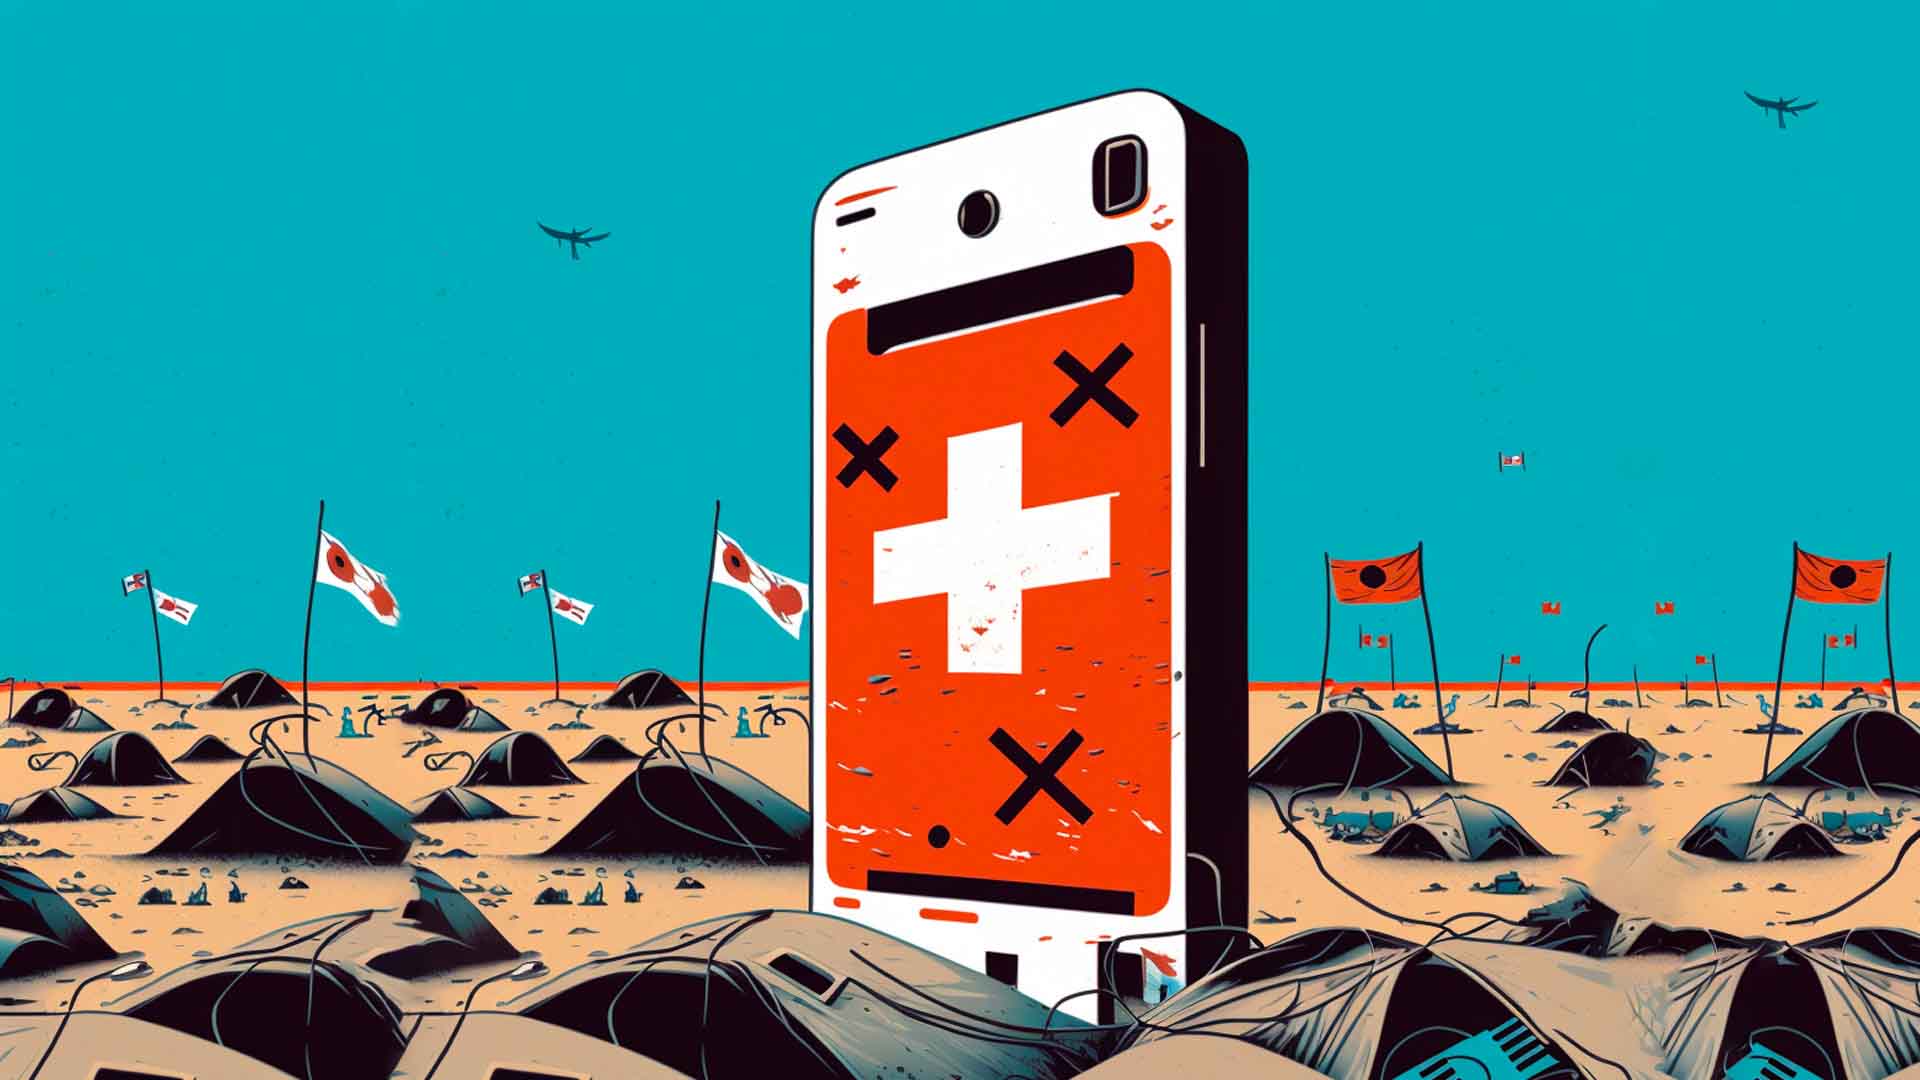 A graphic image shows a giant cellphone in the middle of a desert. There is a big white cross on a red background in its screen. In the horizon are non-descript flags. 